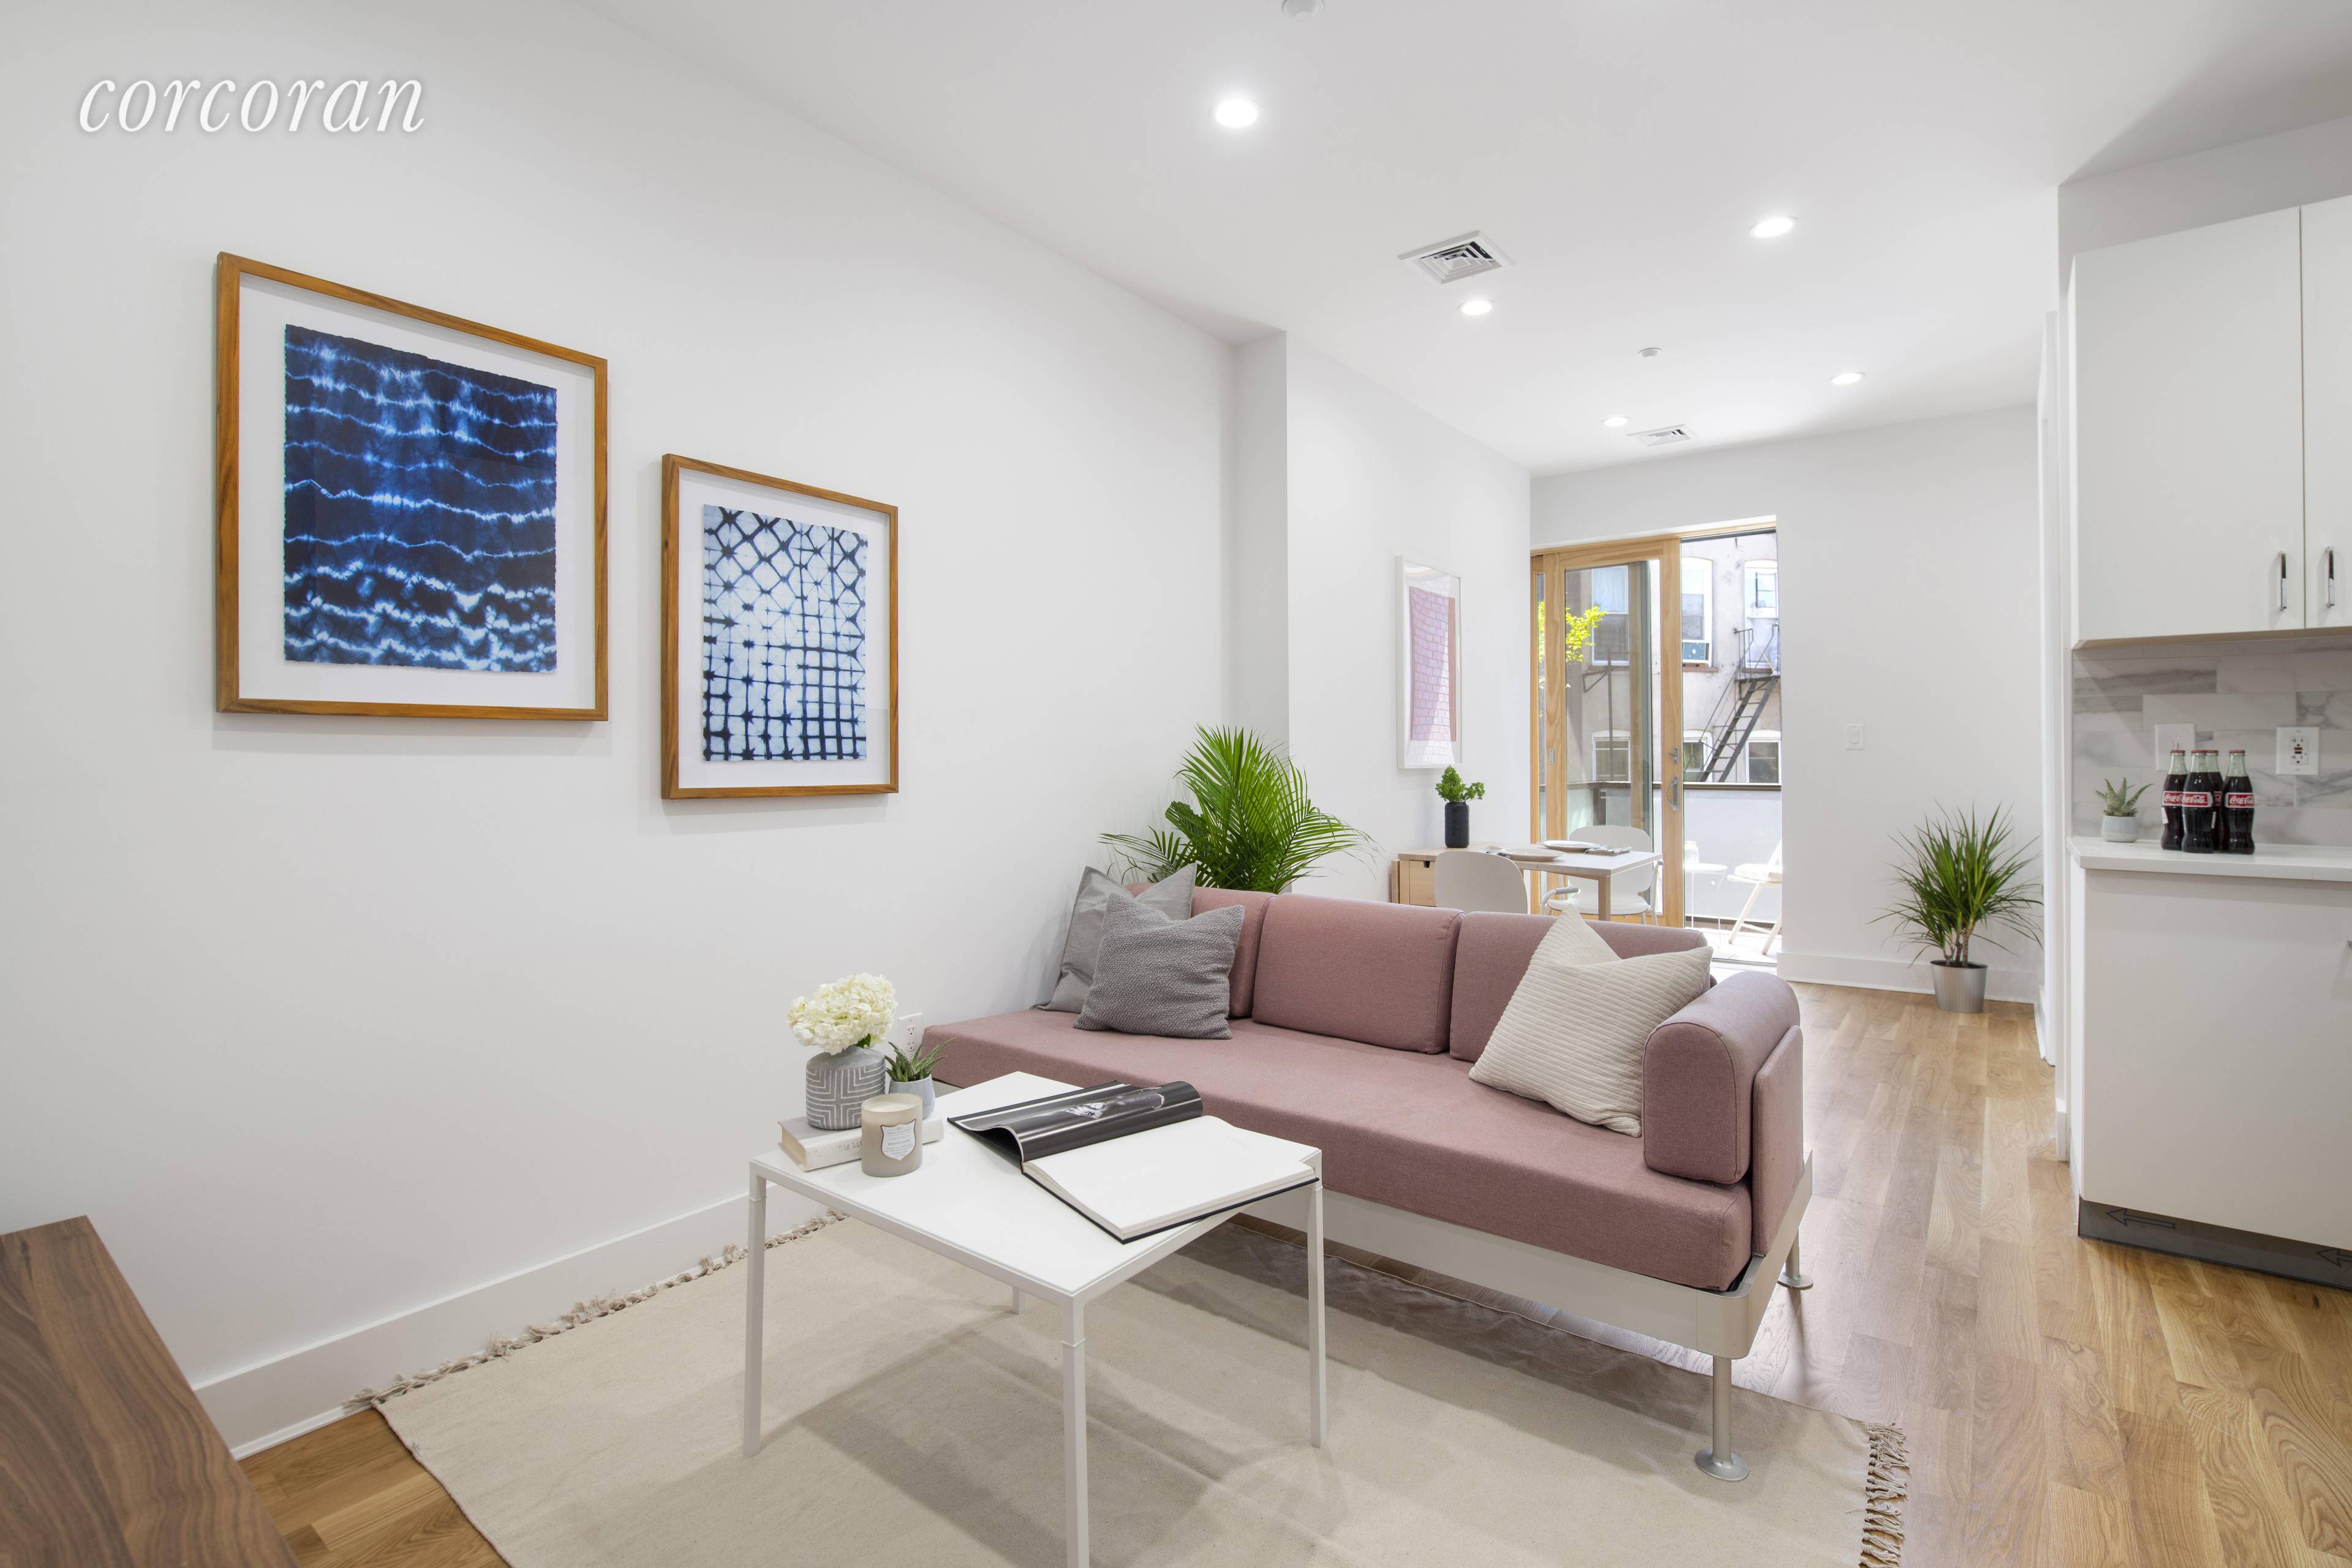 Welcome to The Pearl at 1776 Broadway, a brand new condominium development nestled in the intersection between Ocean Hill, Bed Stuy, and Bushwick.